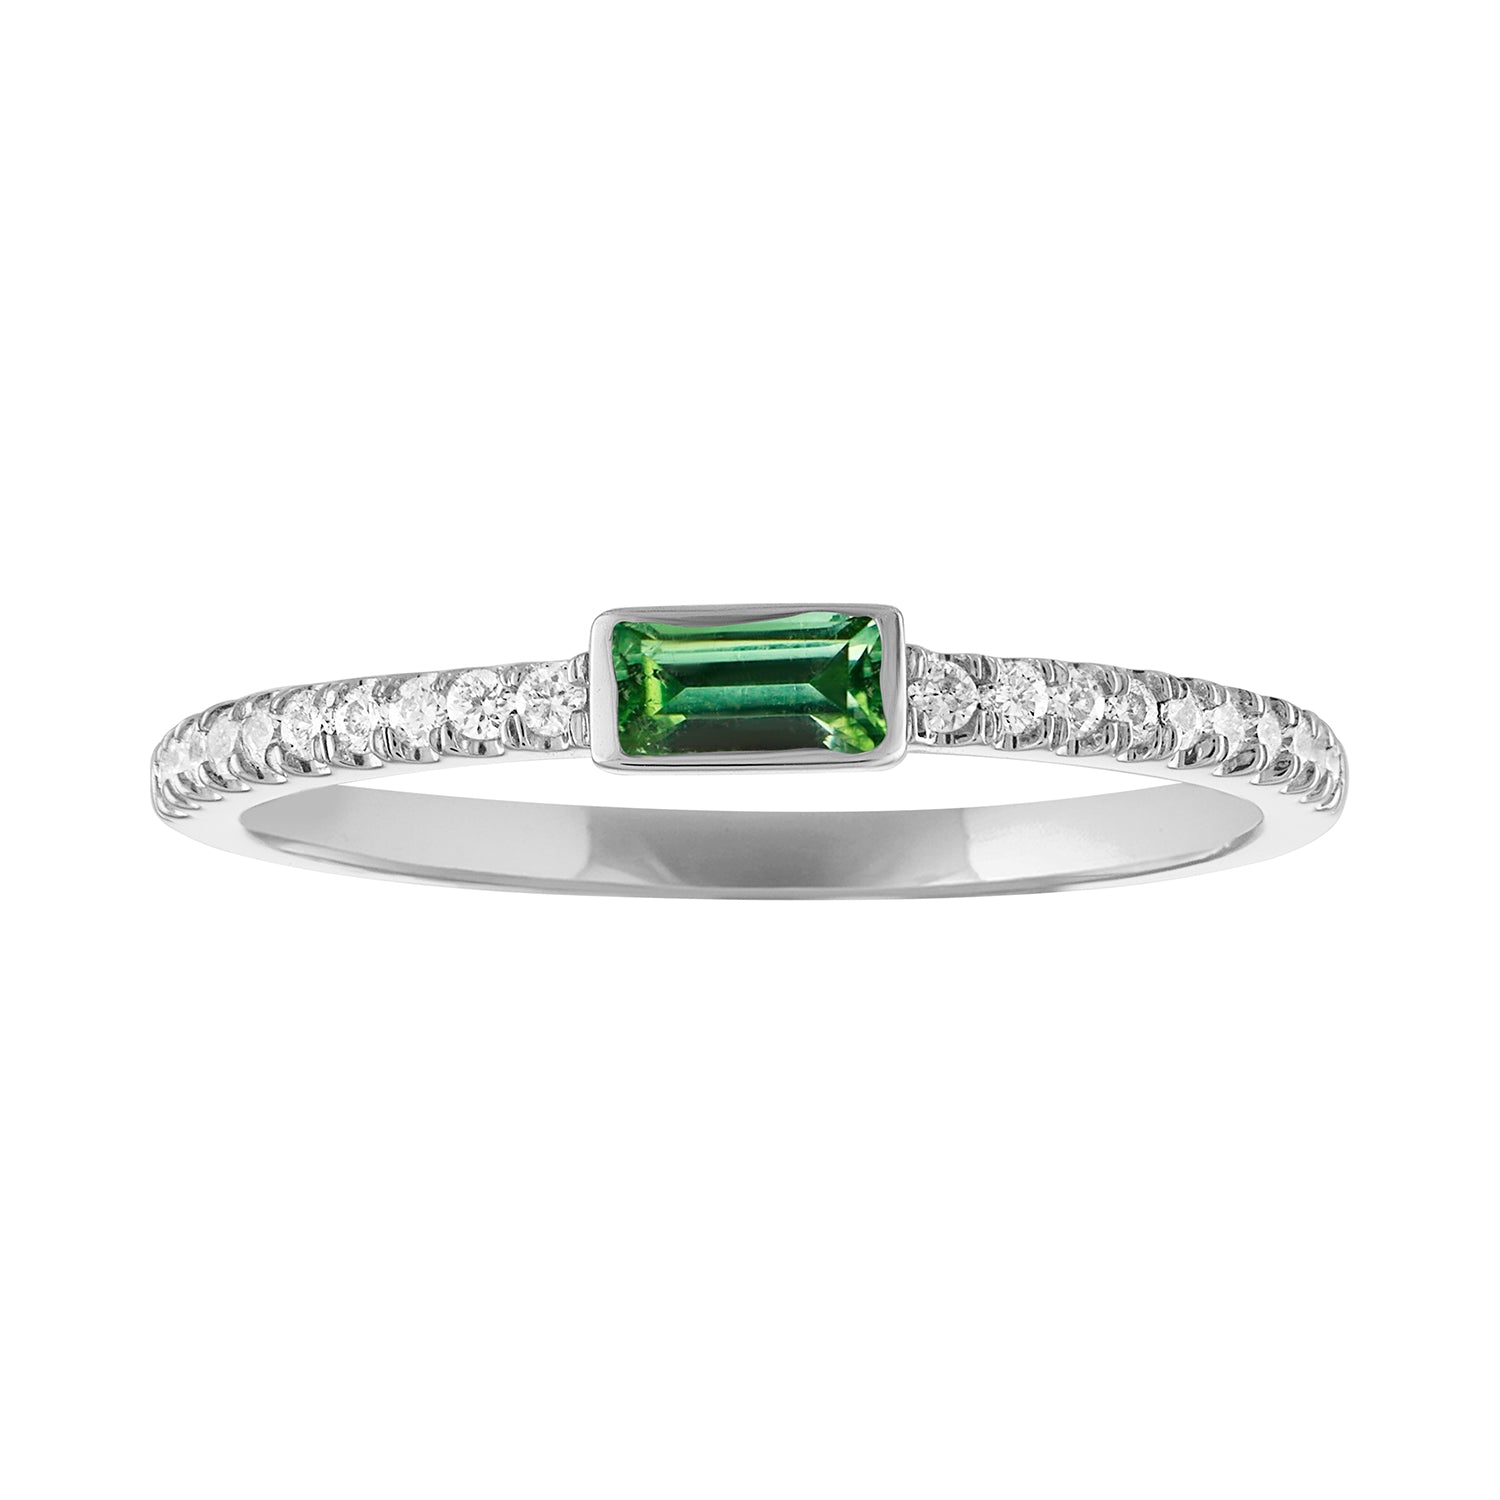 White gold skinny band with a bezeled emerald baguette in the center and round diamonds on the shank. 